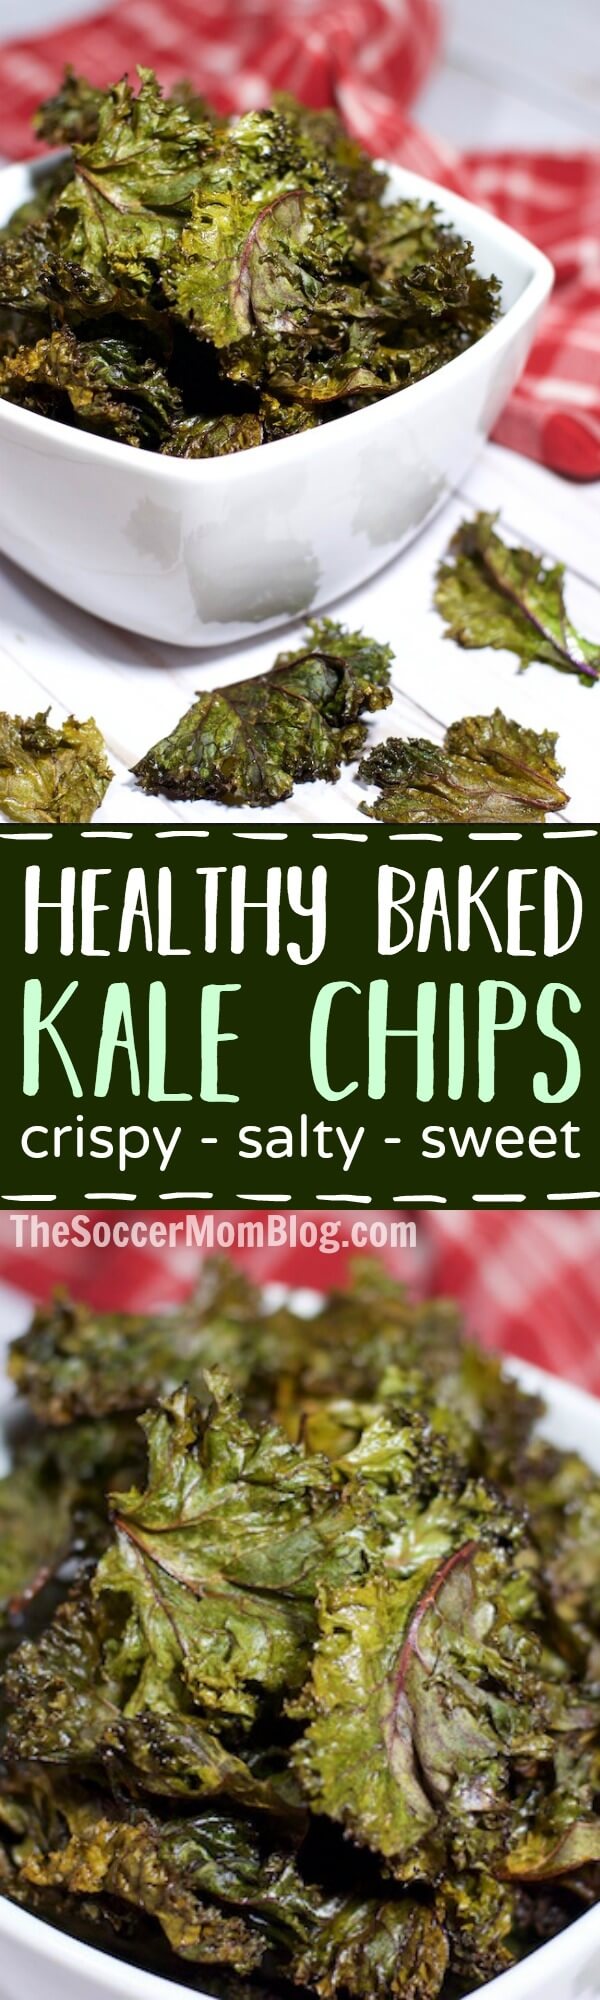 Crispy, salty, & a touch of sweet — these Baked Purple Kale Chips are so tasty you might just eat the whole batch! (But don't worry, they're good for you!)